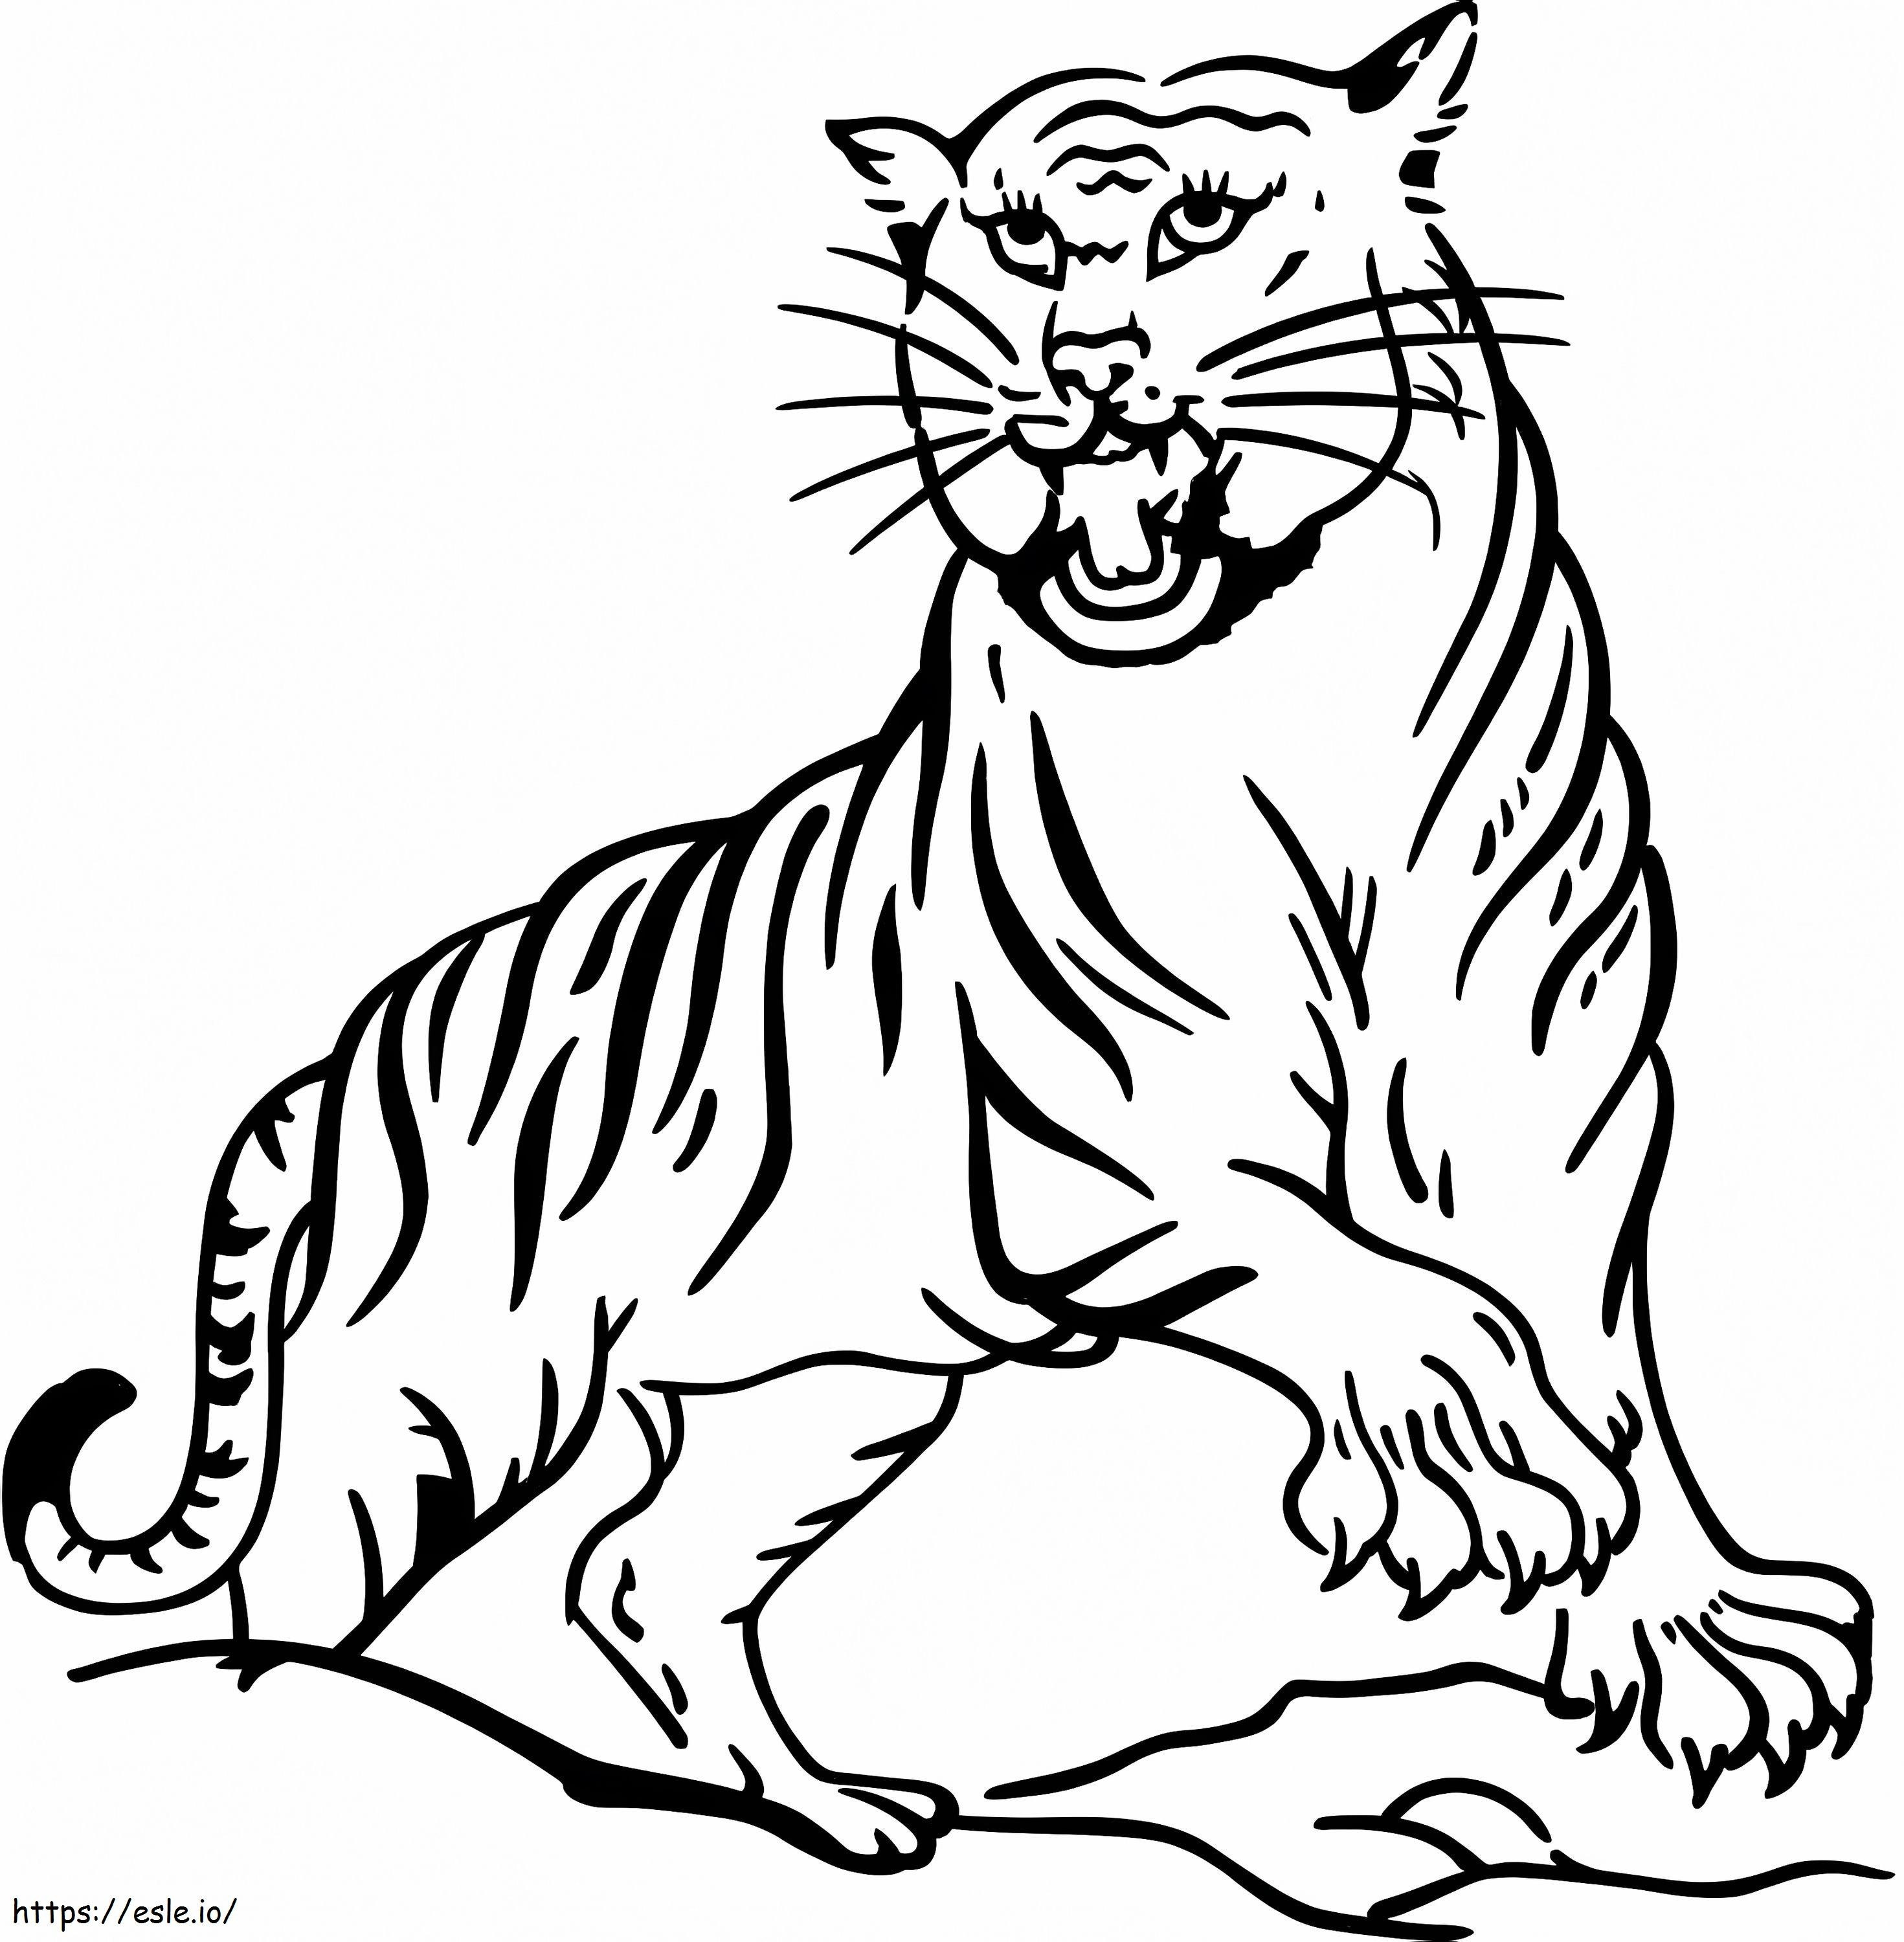 An Angry Tiger coloring page